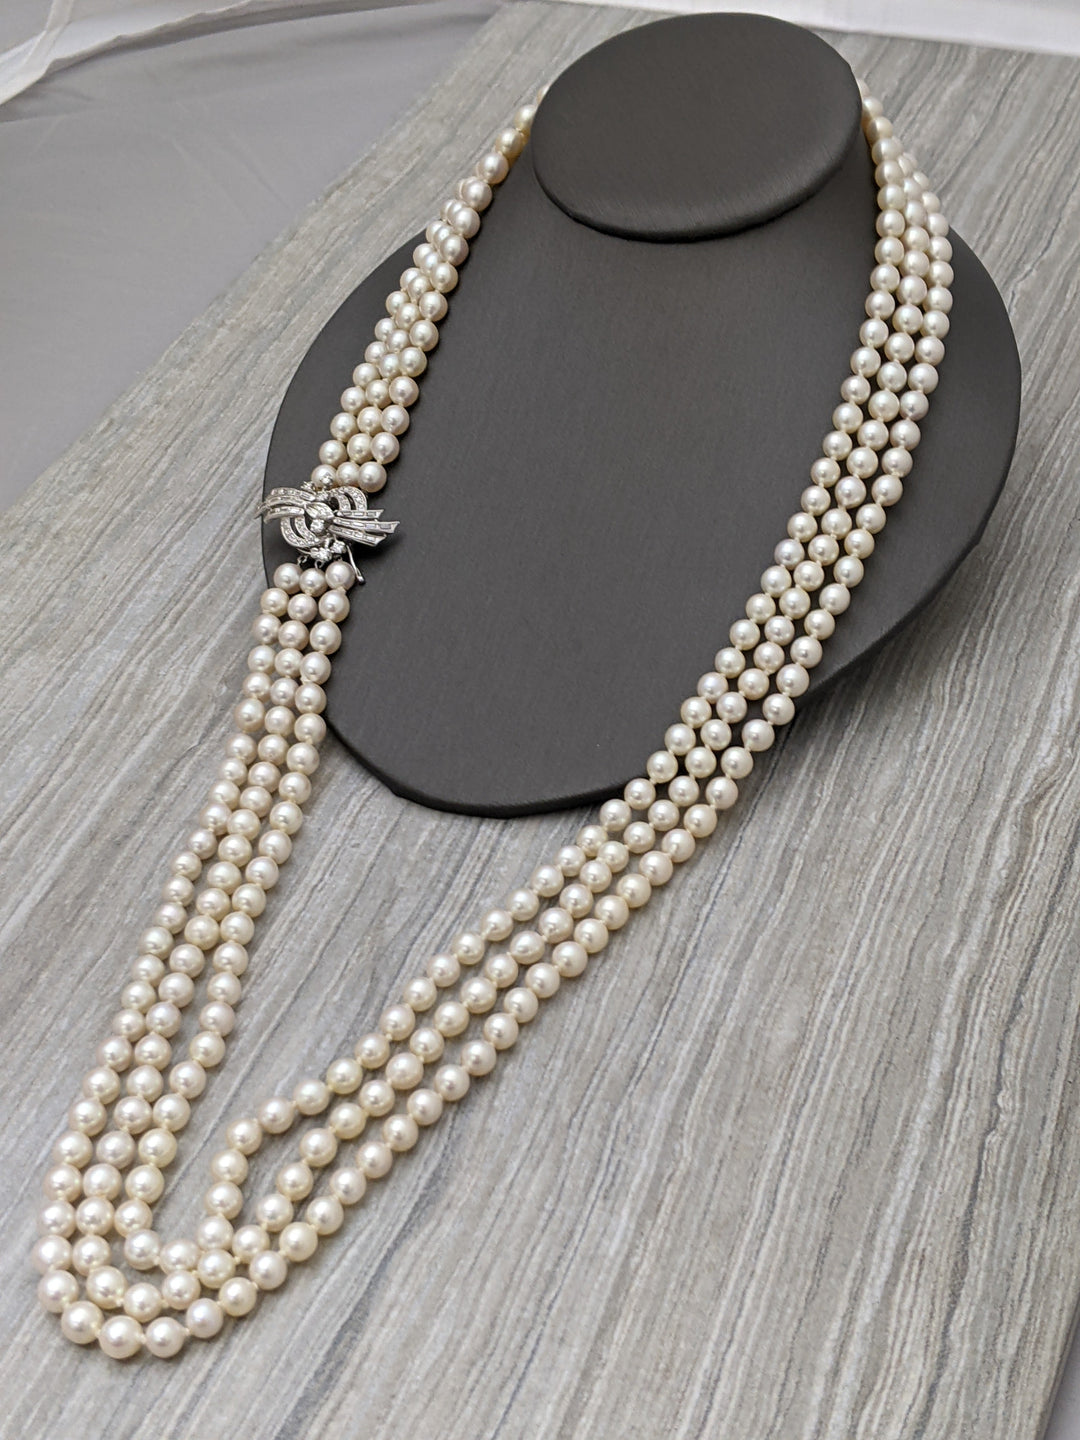 Vintage Chanel Triple Strand Pearl Necklace